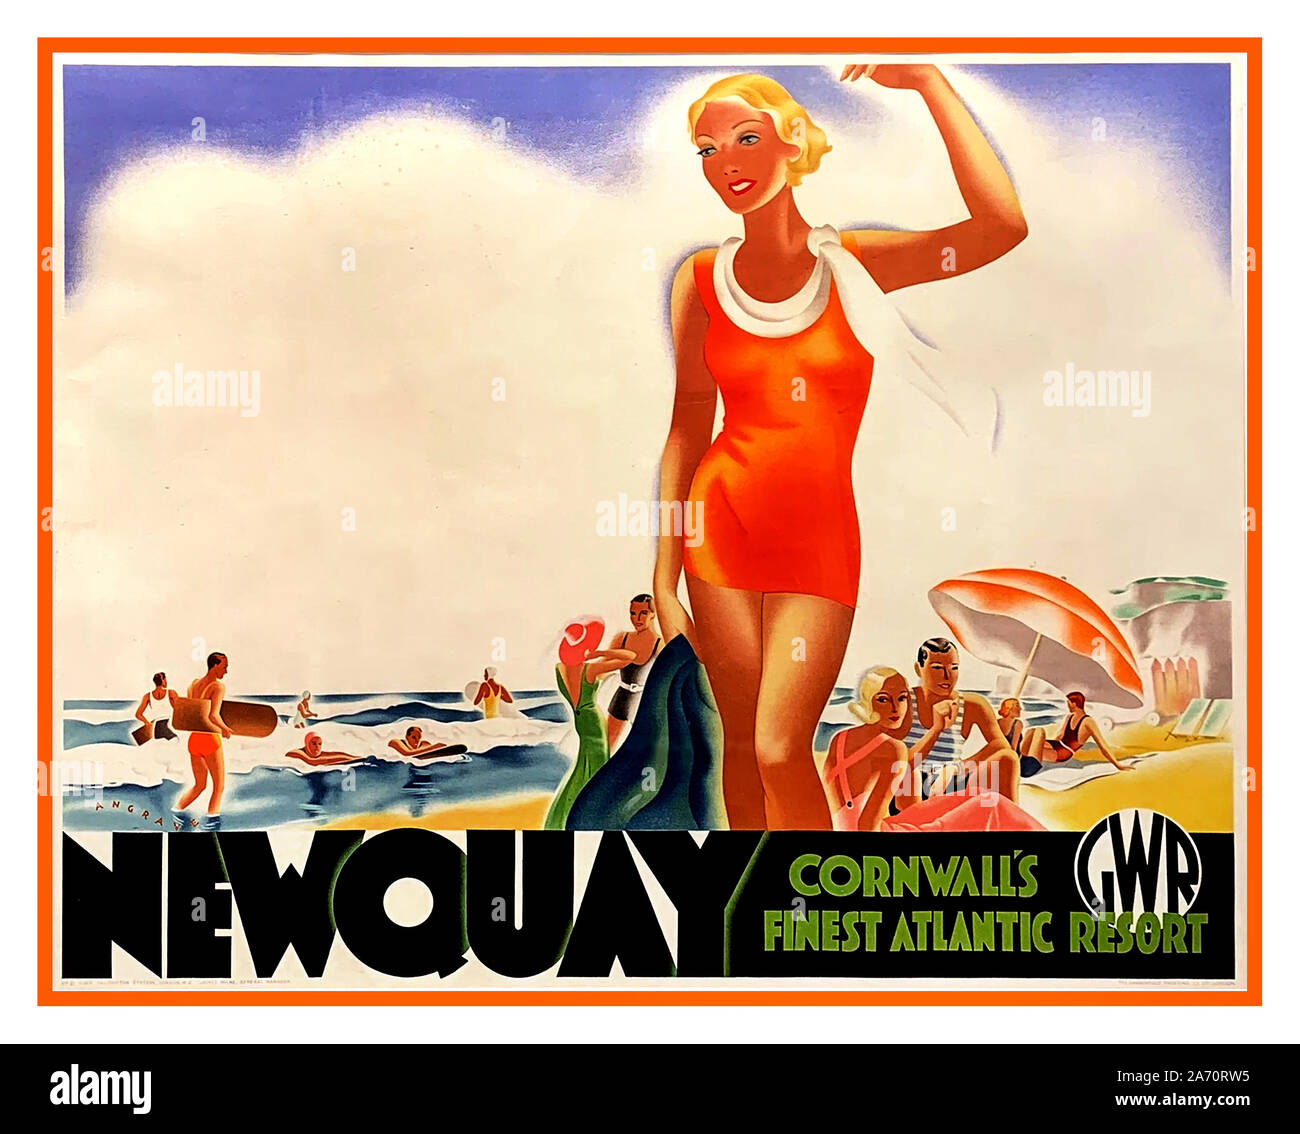 1930’s Vintage Retro Travel UK NEWQUAY Cornwall’s Finest Atlantic Resort Vintage Travel GWR Rail Poster Coloured lithograph, Stock Photo